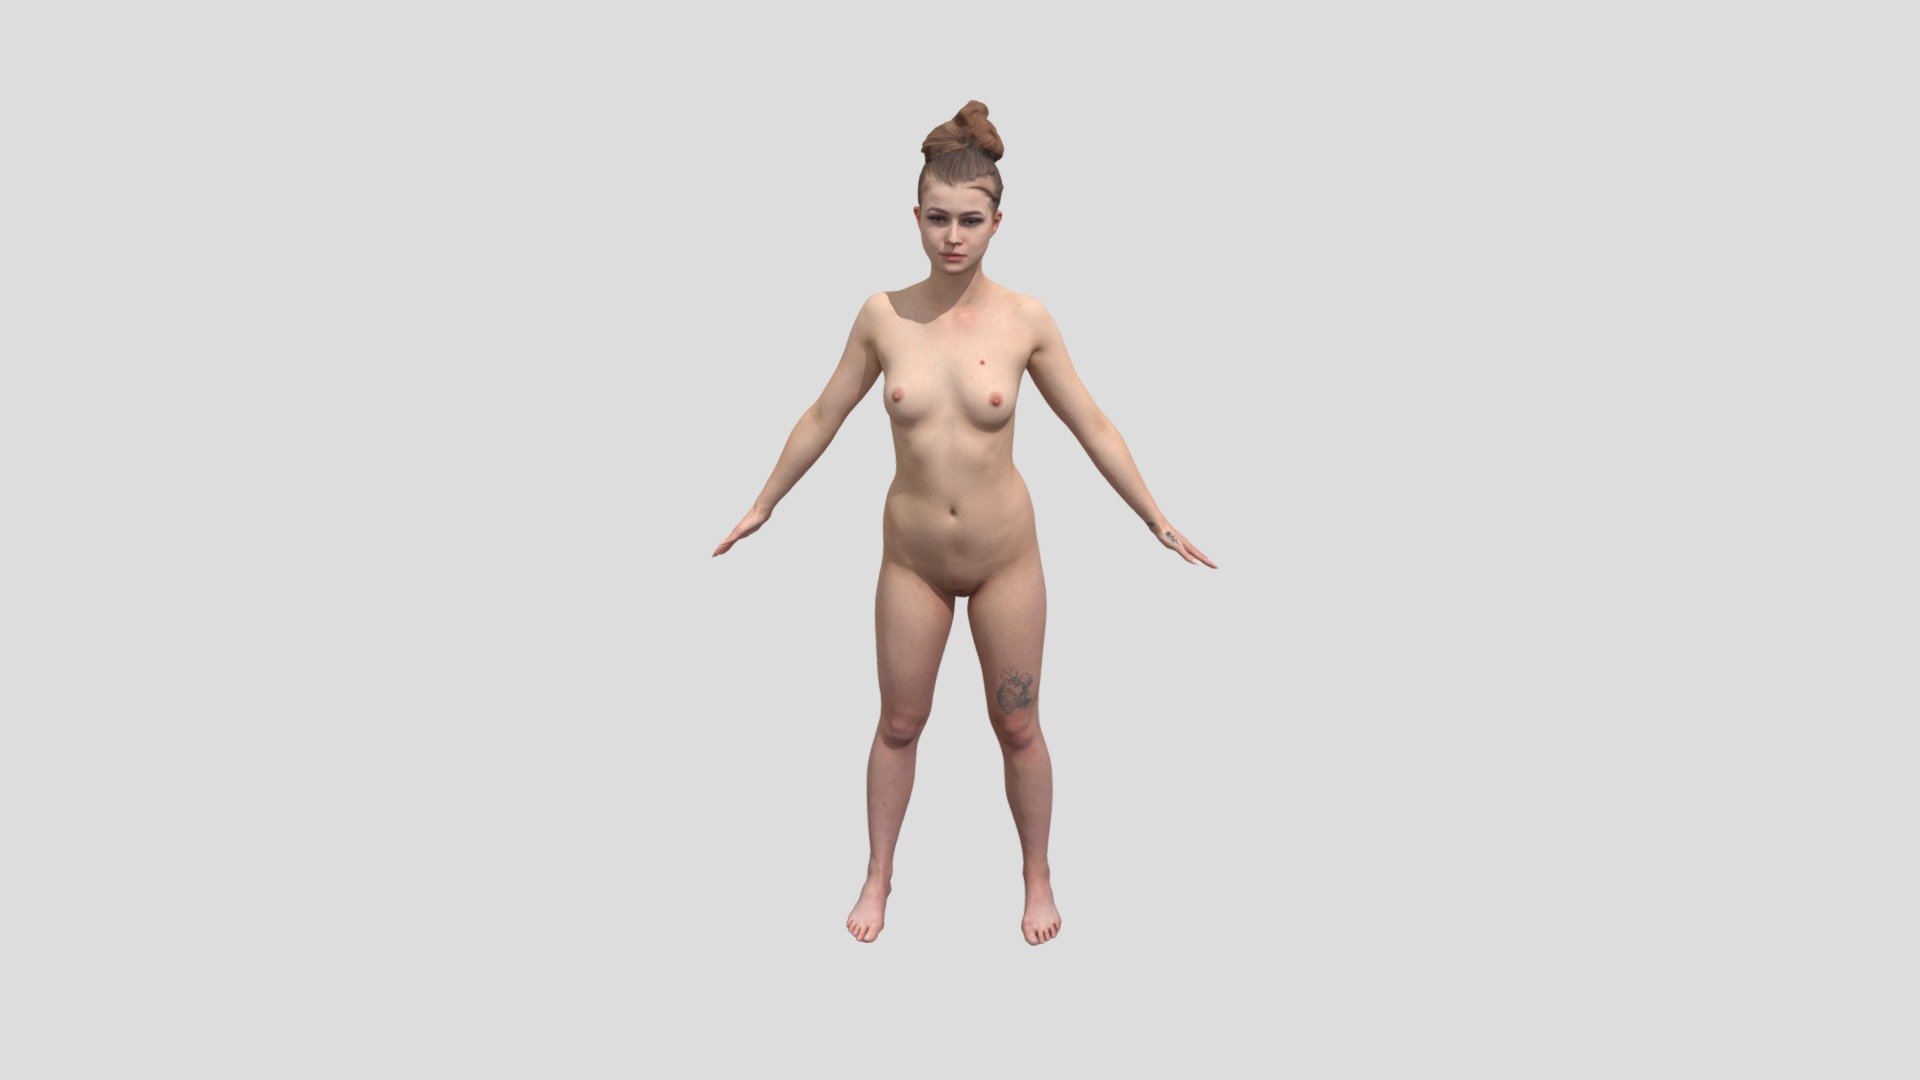 Real Life Human Scans is a project by 3Dsk which focus on diversity of human bodies, faces and expressions.

Ethnicity: white
Gender: female
Age: 18
Height: 173 cm
Weight: 58 kg

Technical Specifications:




OBJ file / 1 000 000 polys

8k / PNG diffuse texture

NOTE: This is a cleaned raw scan in Zbrush postproduction but no retopology.
This is the version with less poly without Zbrush file.

3Dsk Store provides all you need for 2D&amp;3D artist and game developers. Explore raw 3D scans &amp; retopologized models of head, hand, full body in A-pose or daily pose and props. And a variety of 2D references such as Photo set of standing and sitting man/woman, flexing &amp; expressions. Premade head texture, HD skin and HD eye details 3d model